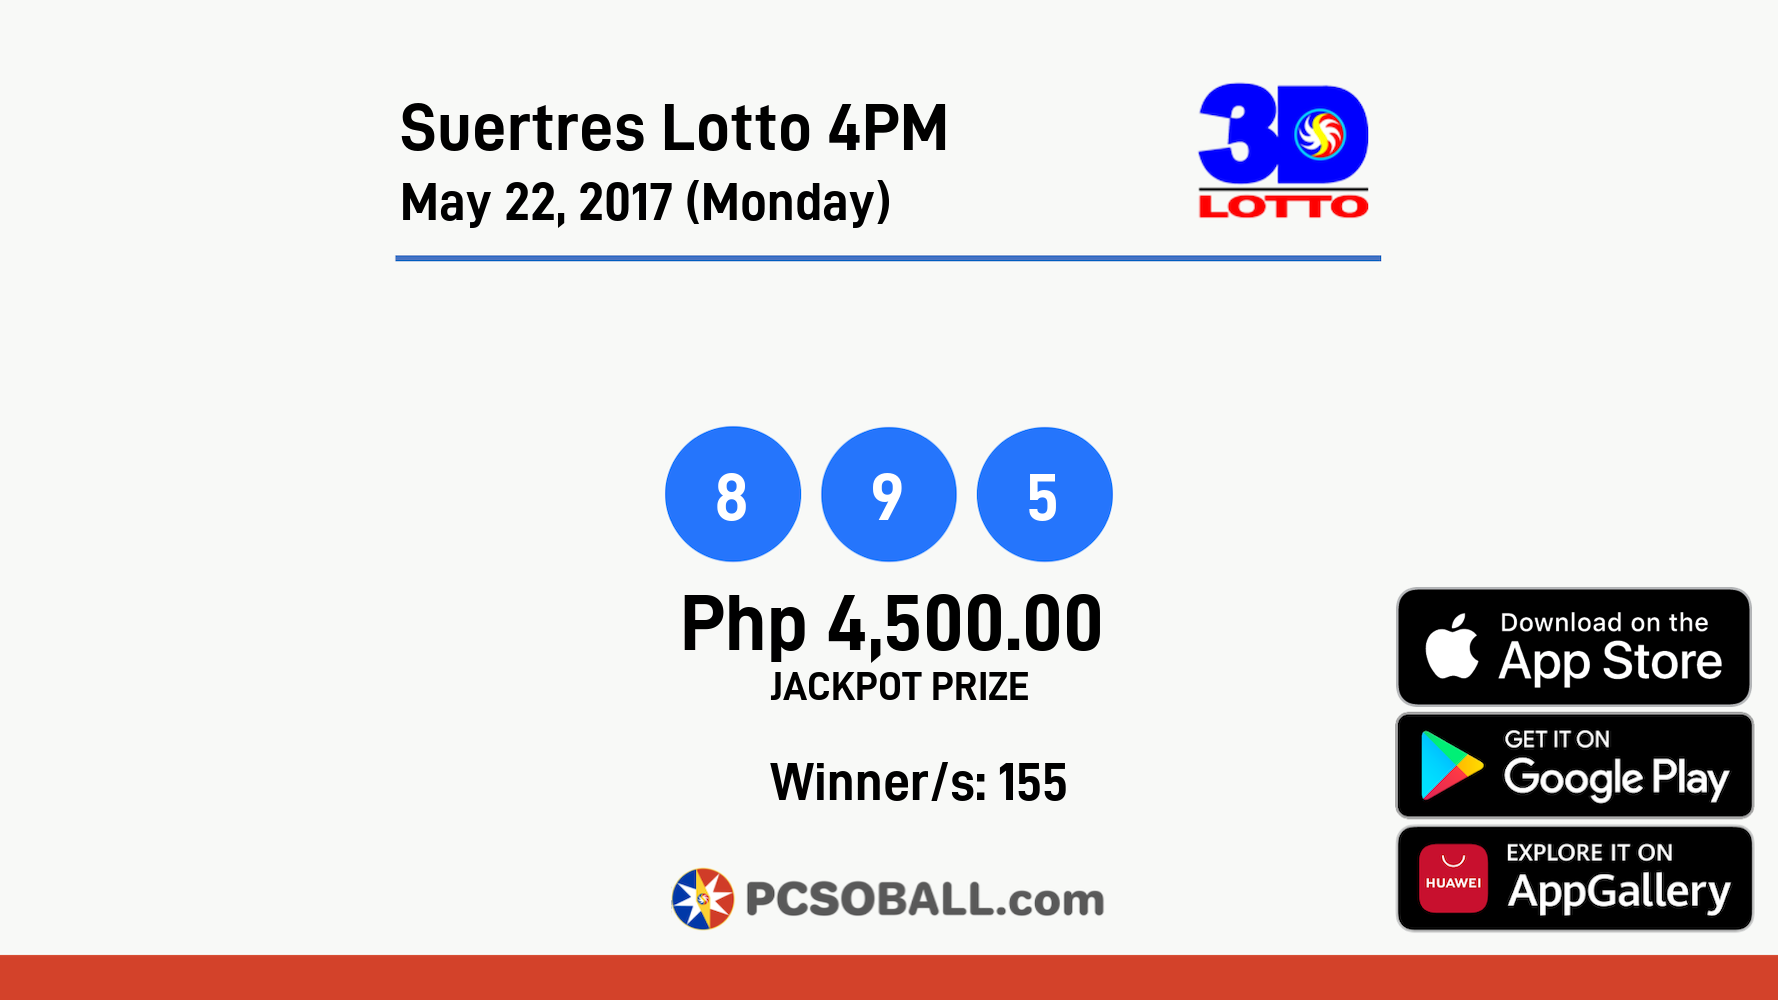 Suertres Lotto 4PM May 22, 2017 (Monday) Result